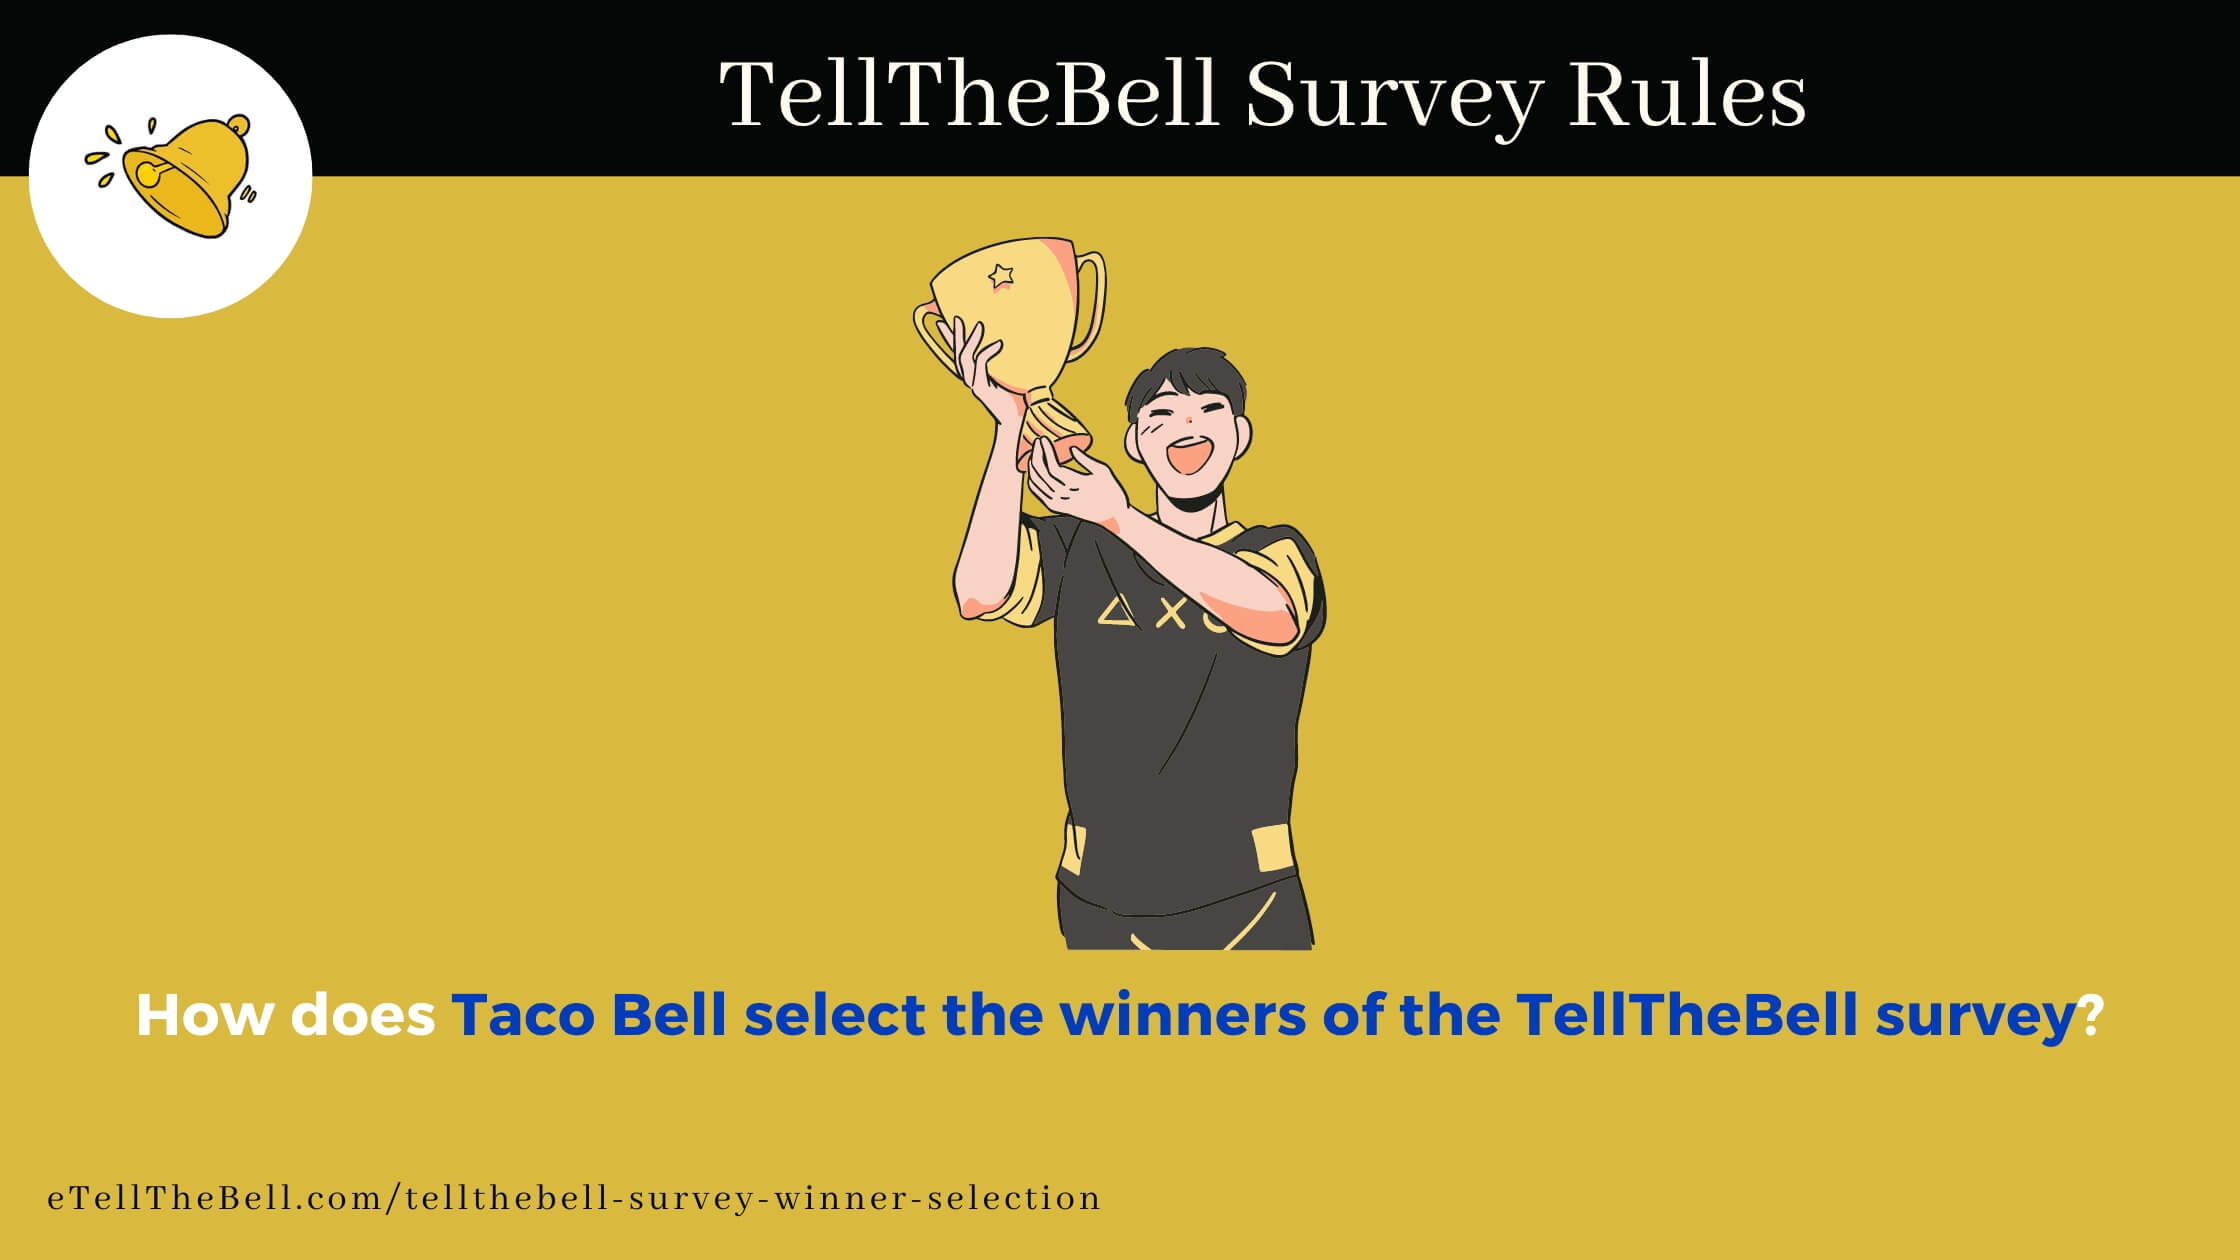 How does Taco Bell select the winners of the TellTheBell survey